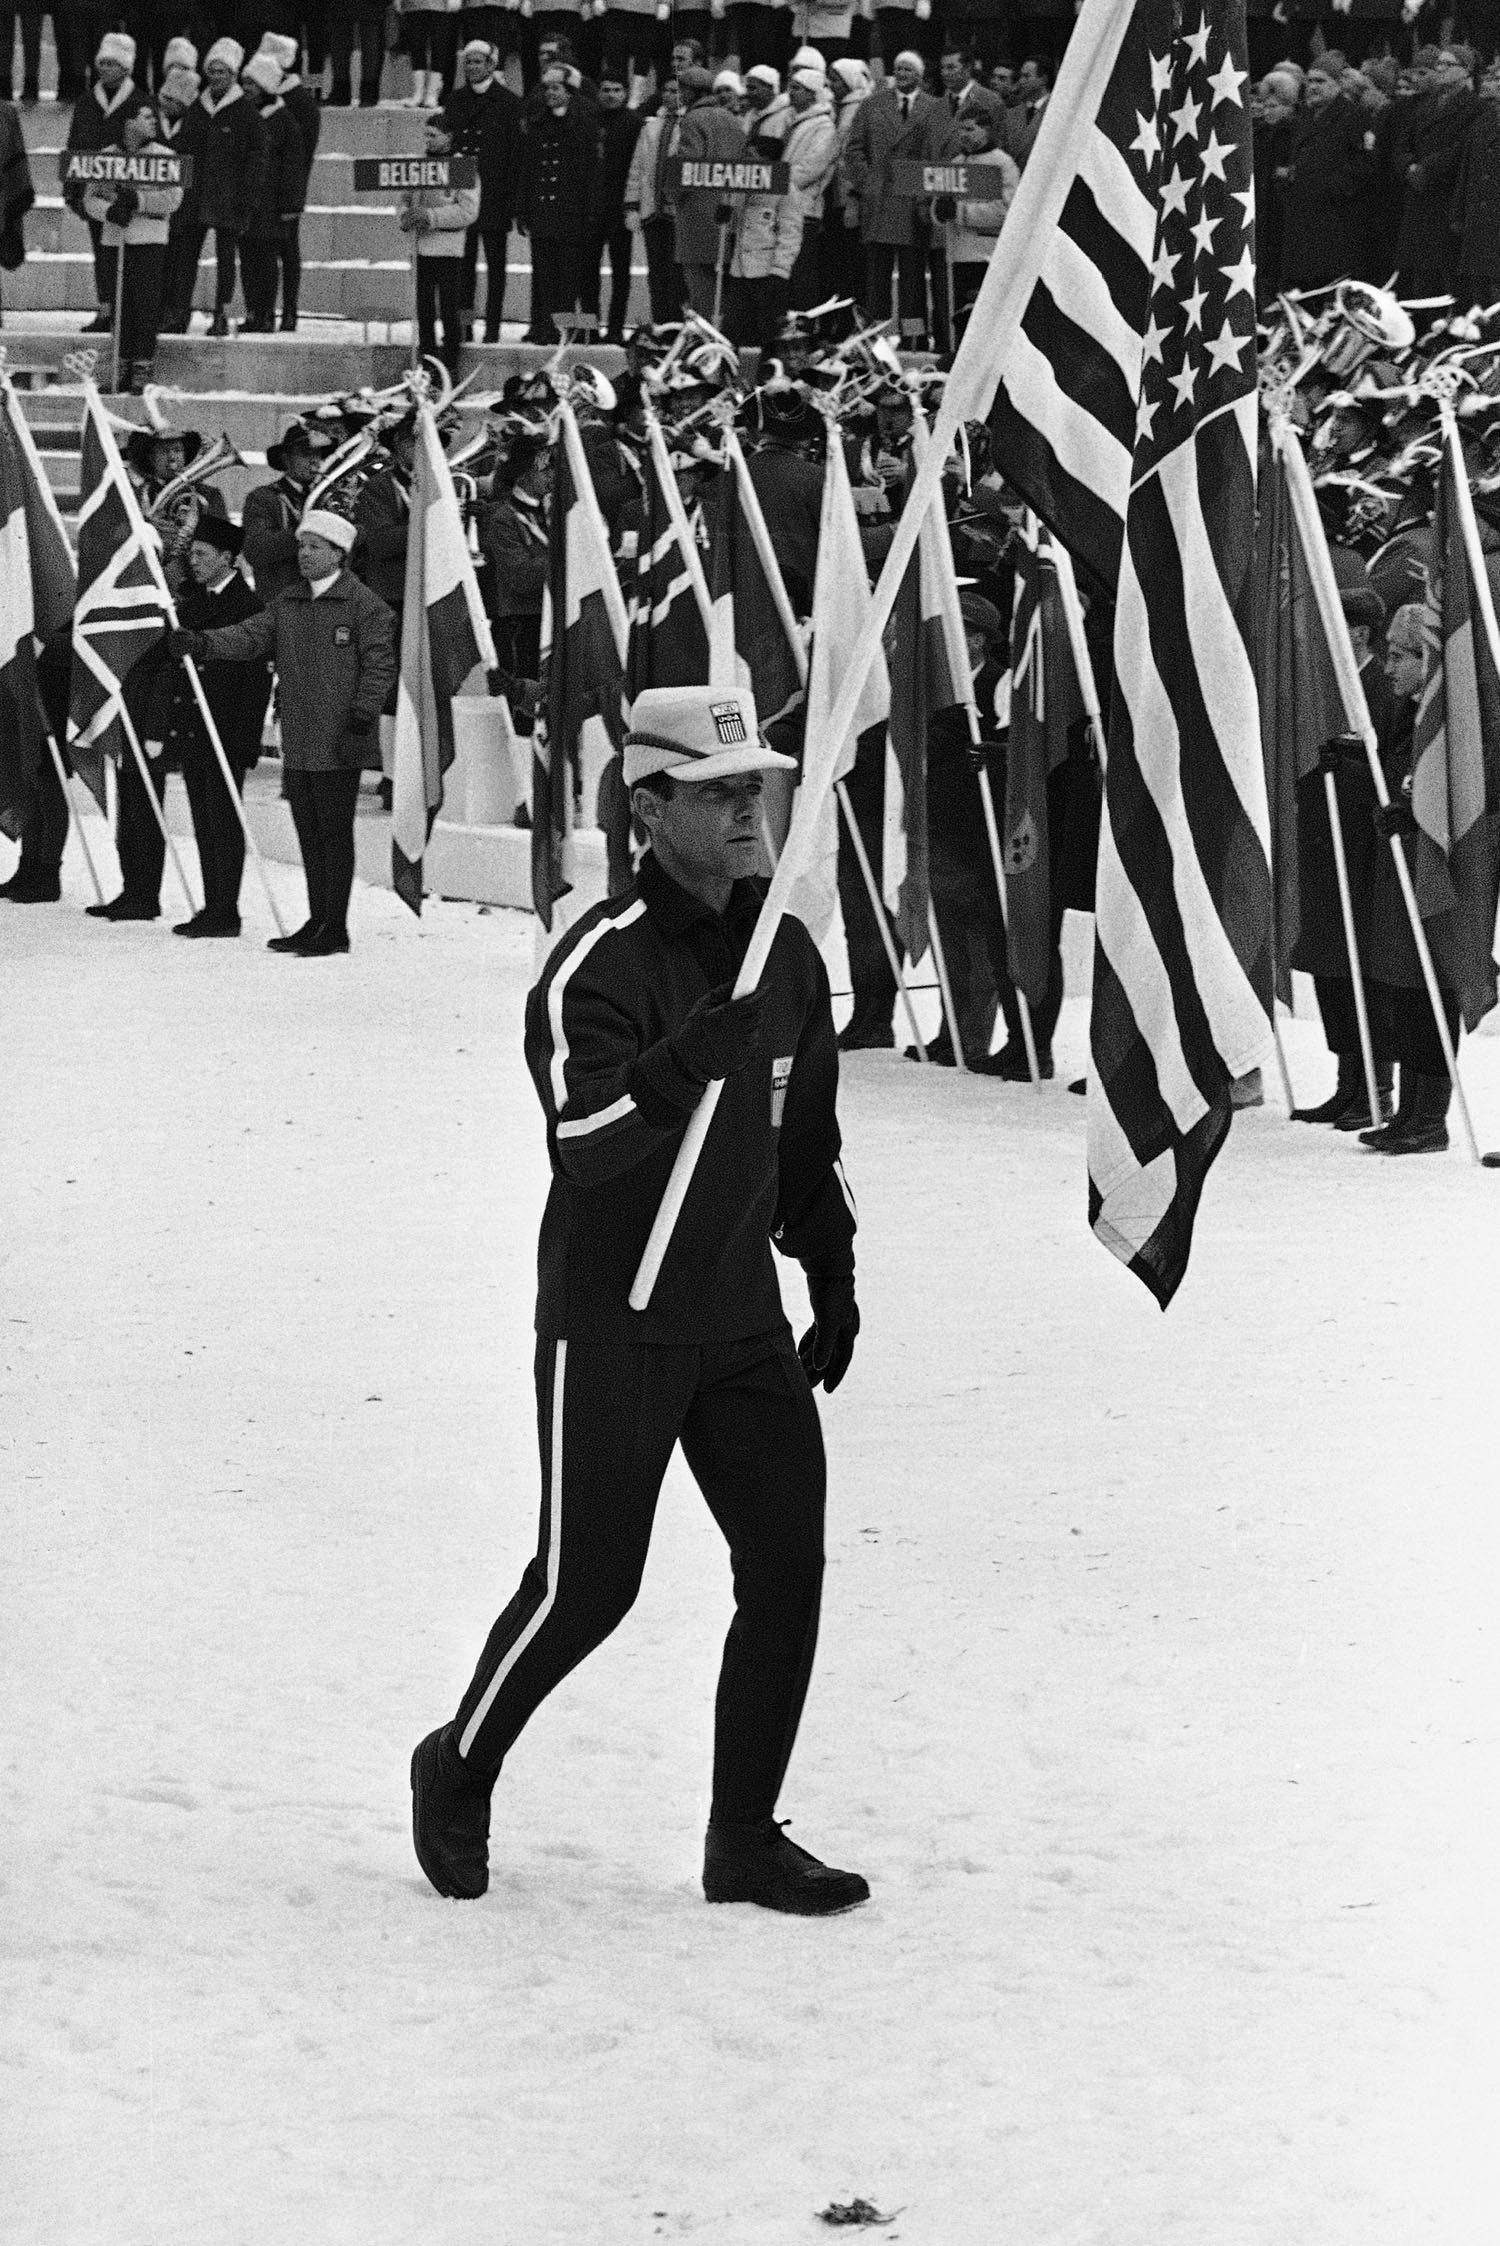 Speedskater Bill Disney carries the flag as he leads his team into the Olympic Ski Stadium at Bergisel for the opening ceremony of the 1964 Winter Olympics in Innsbruck, Austria.